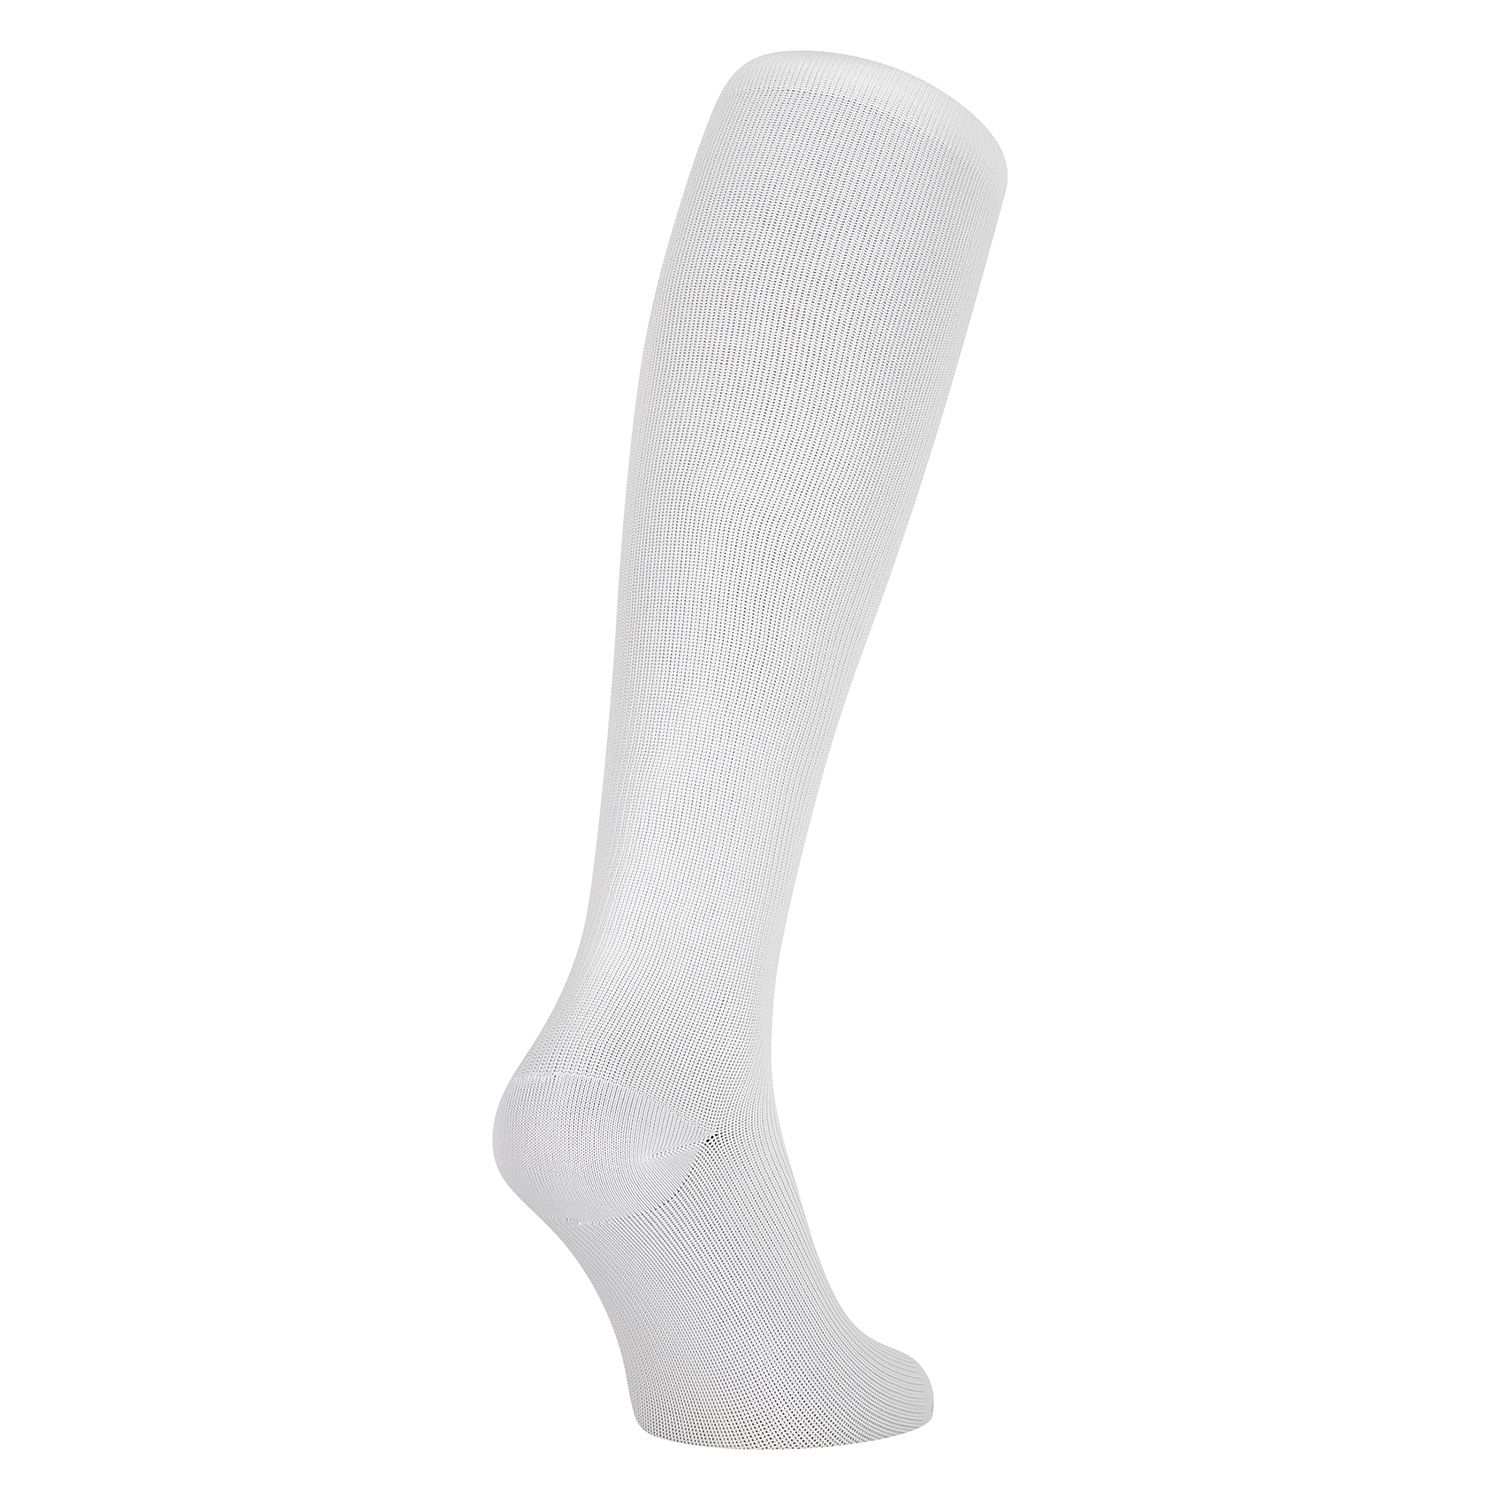 Support Stockings / Travel Stockings - Closed Toe white